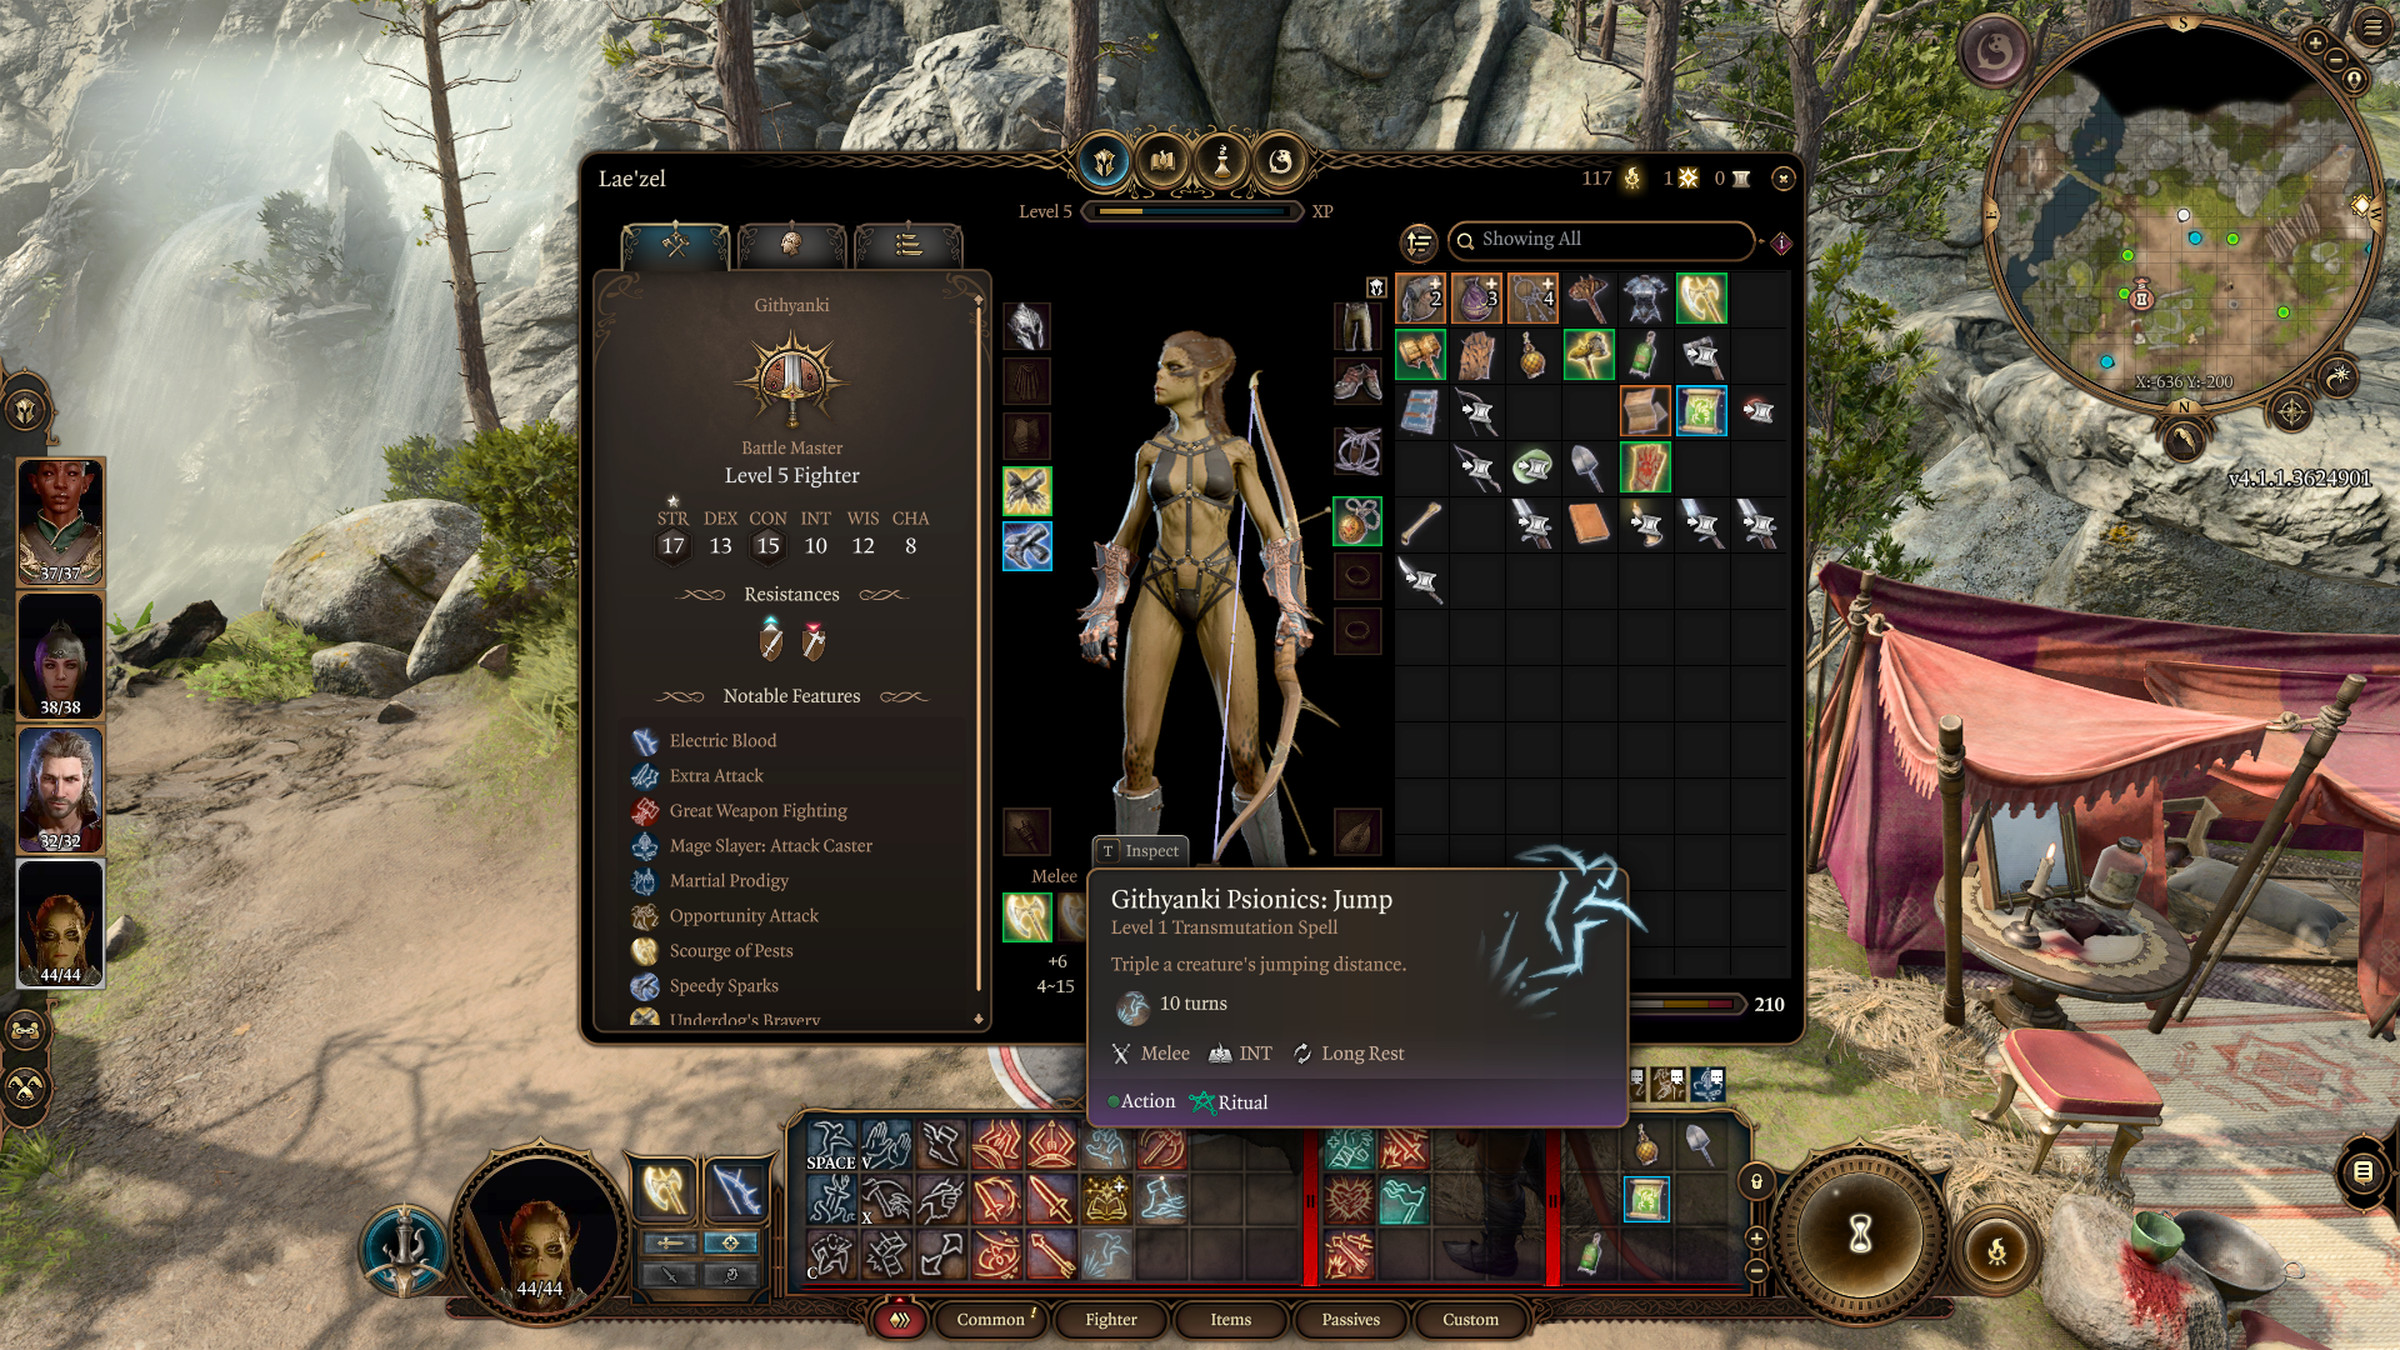 Screenshot from Baldur’s Gate 3 featuring a female githyanki fighter wearing her “underwear” which is a strappy, BDSM inspired one piece body suit.